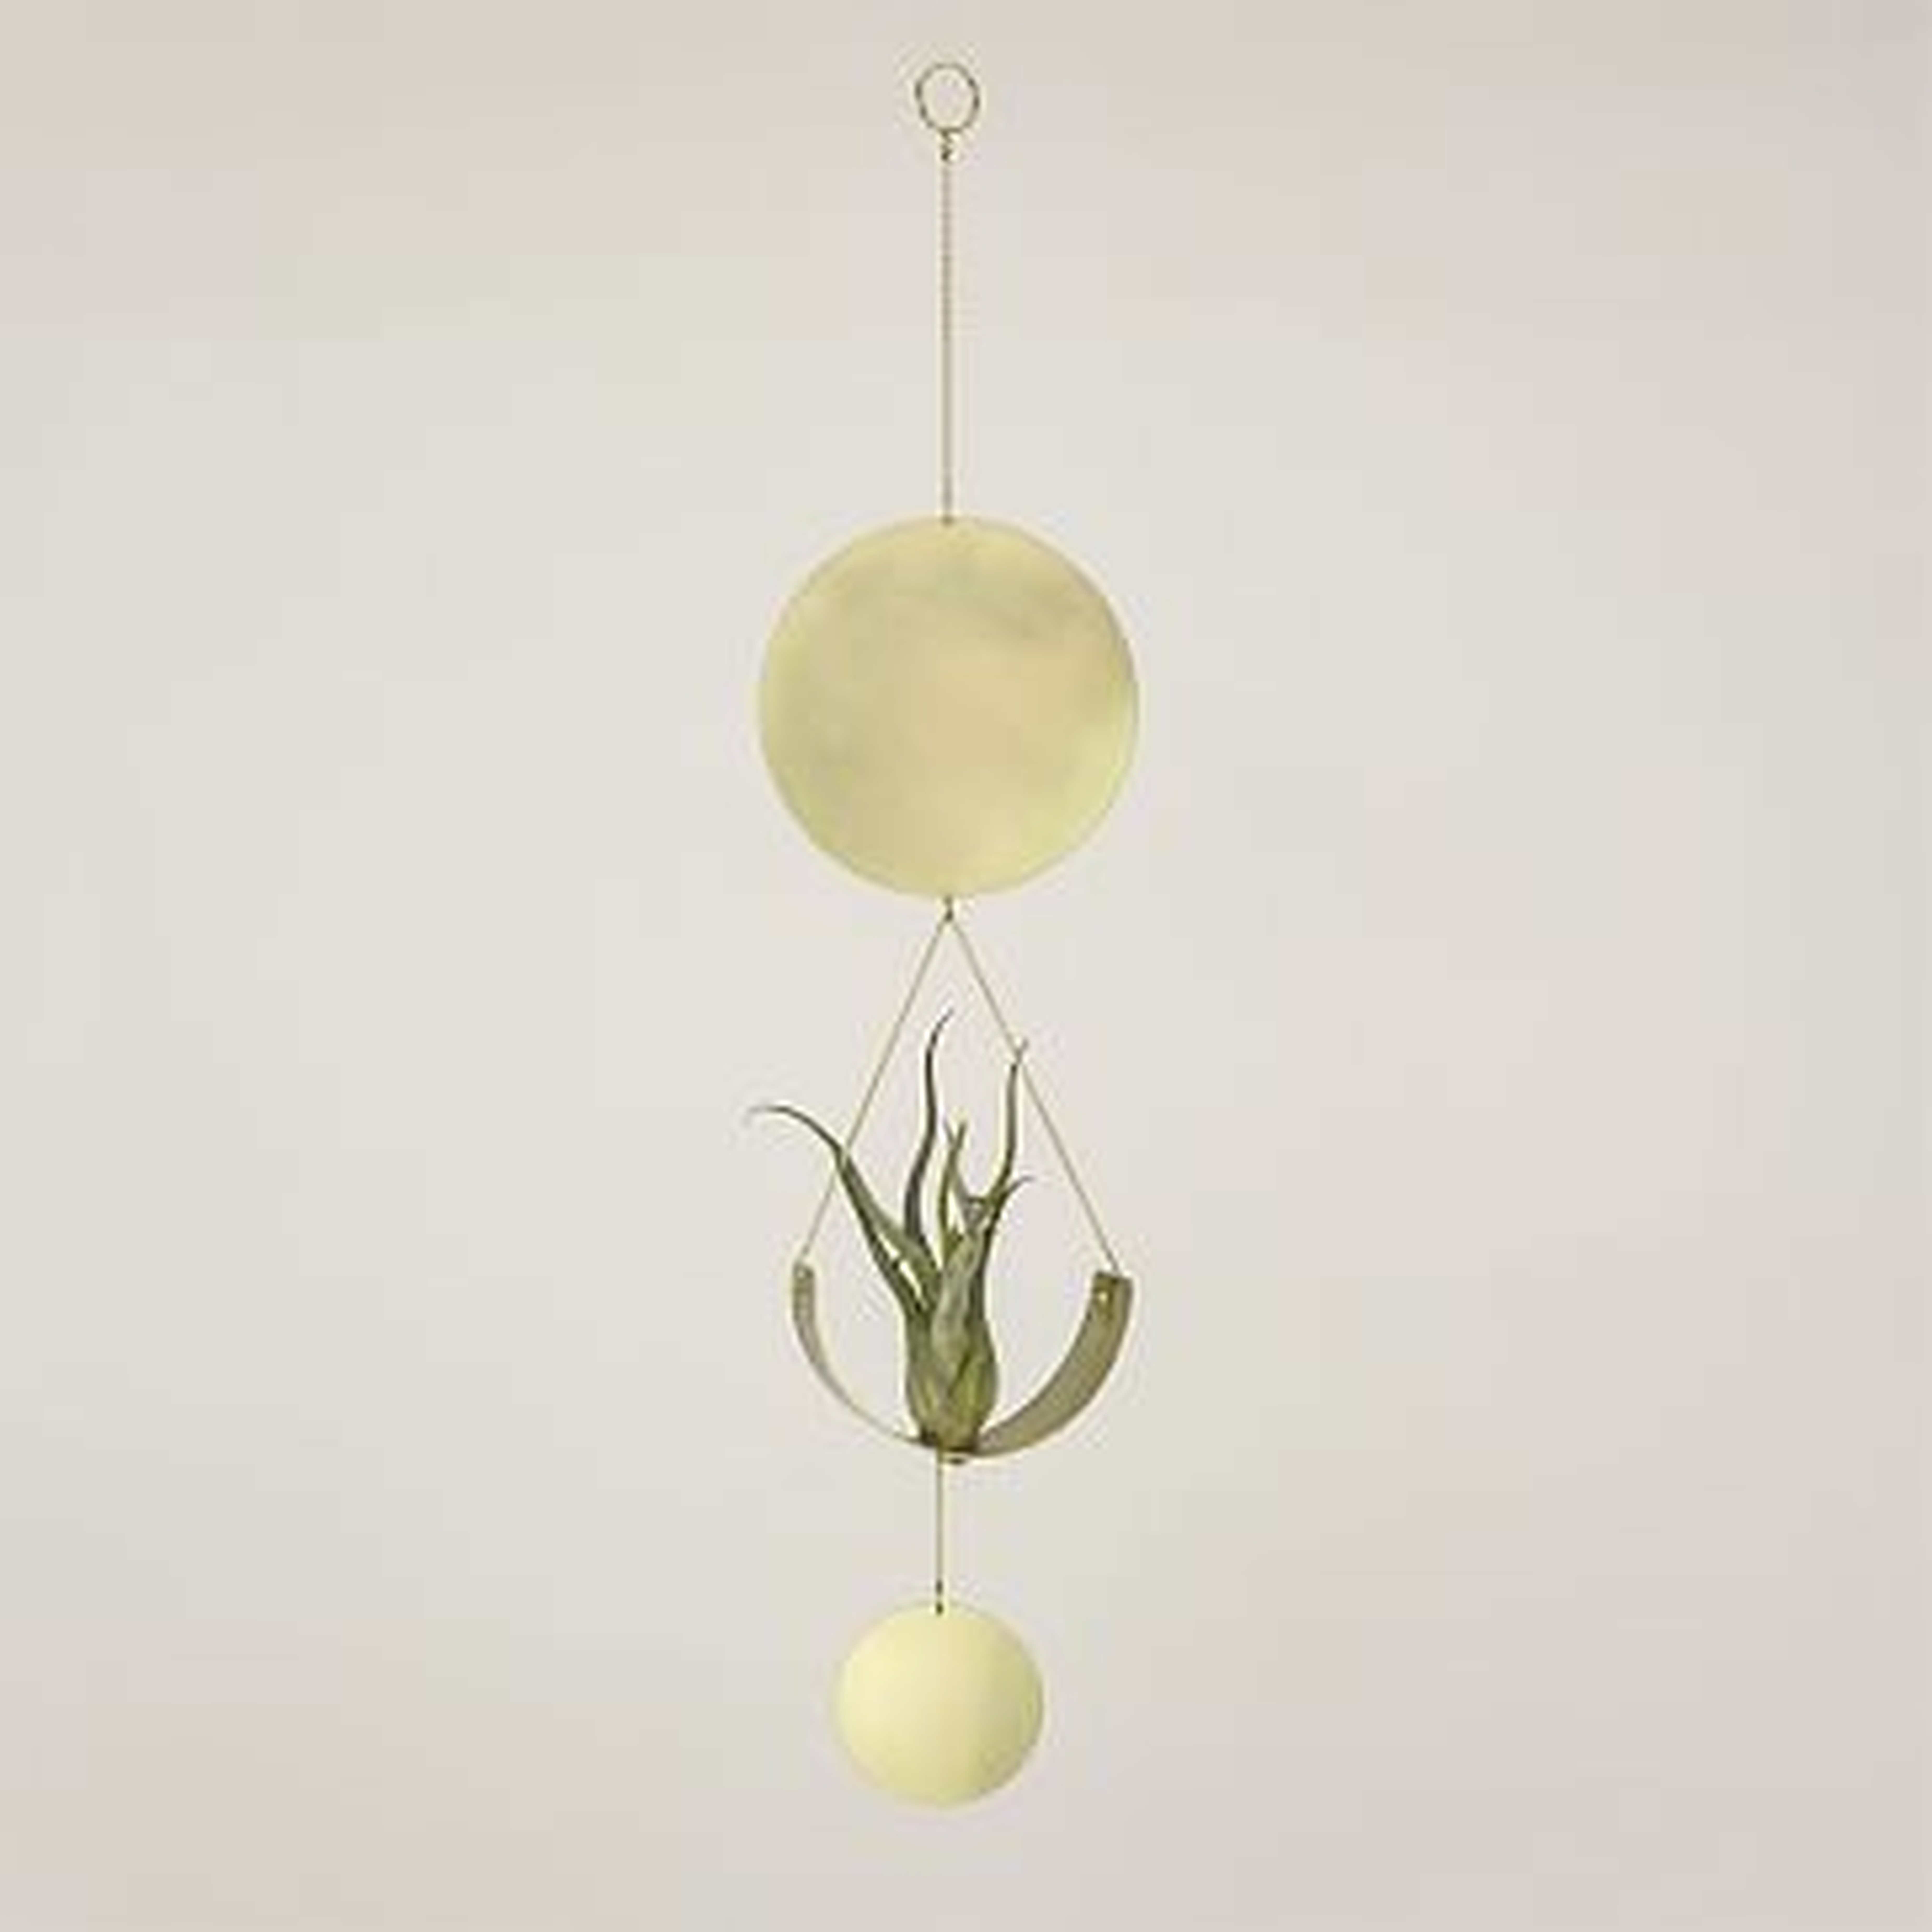 Circle & Line Air Plant Wall Hanging - West Elm